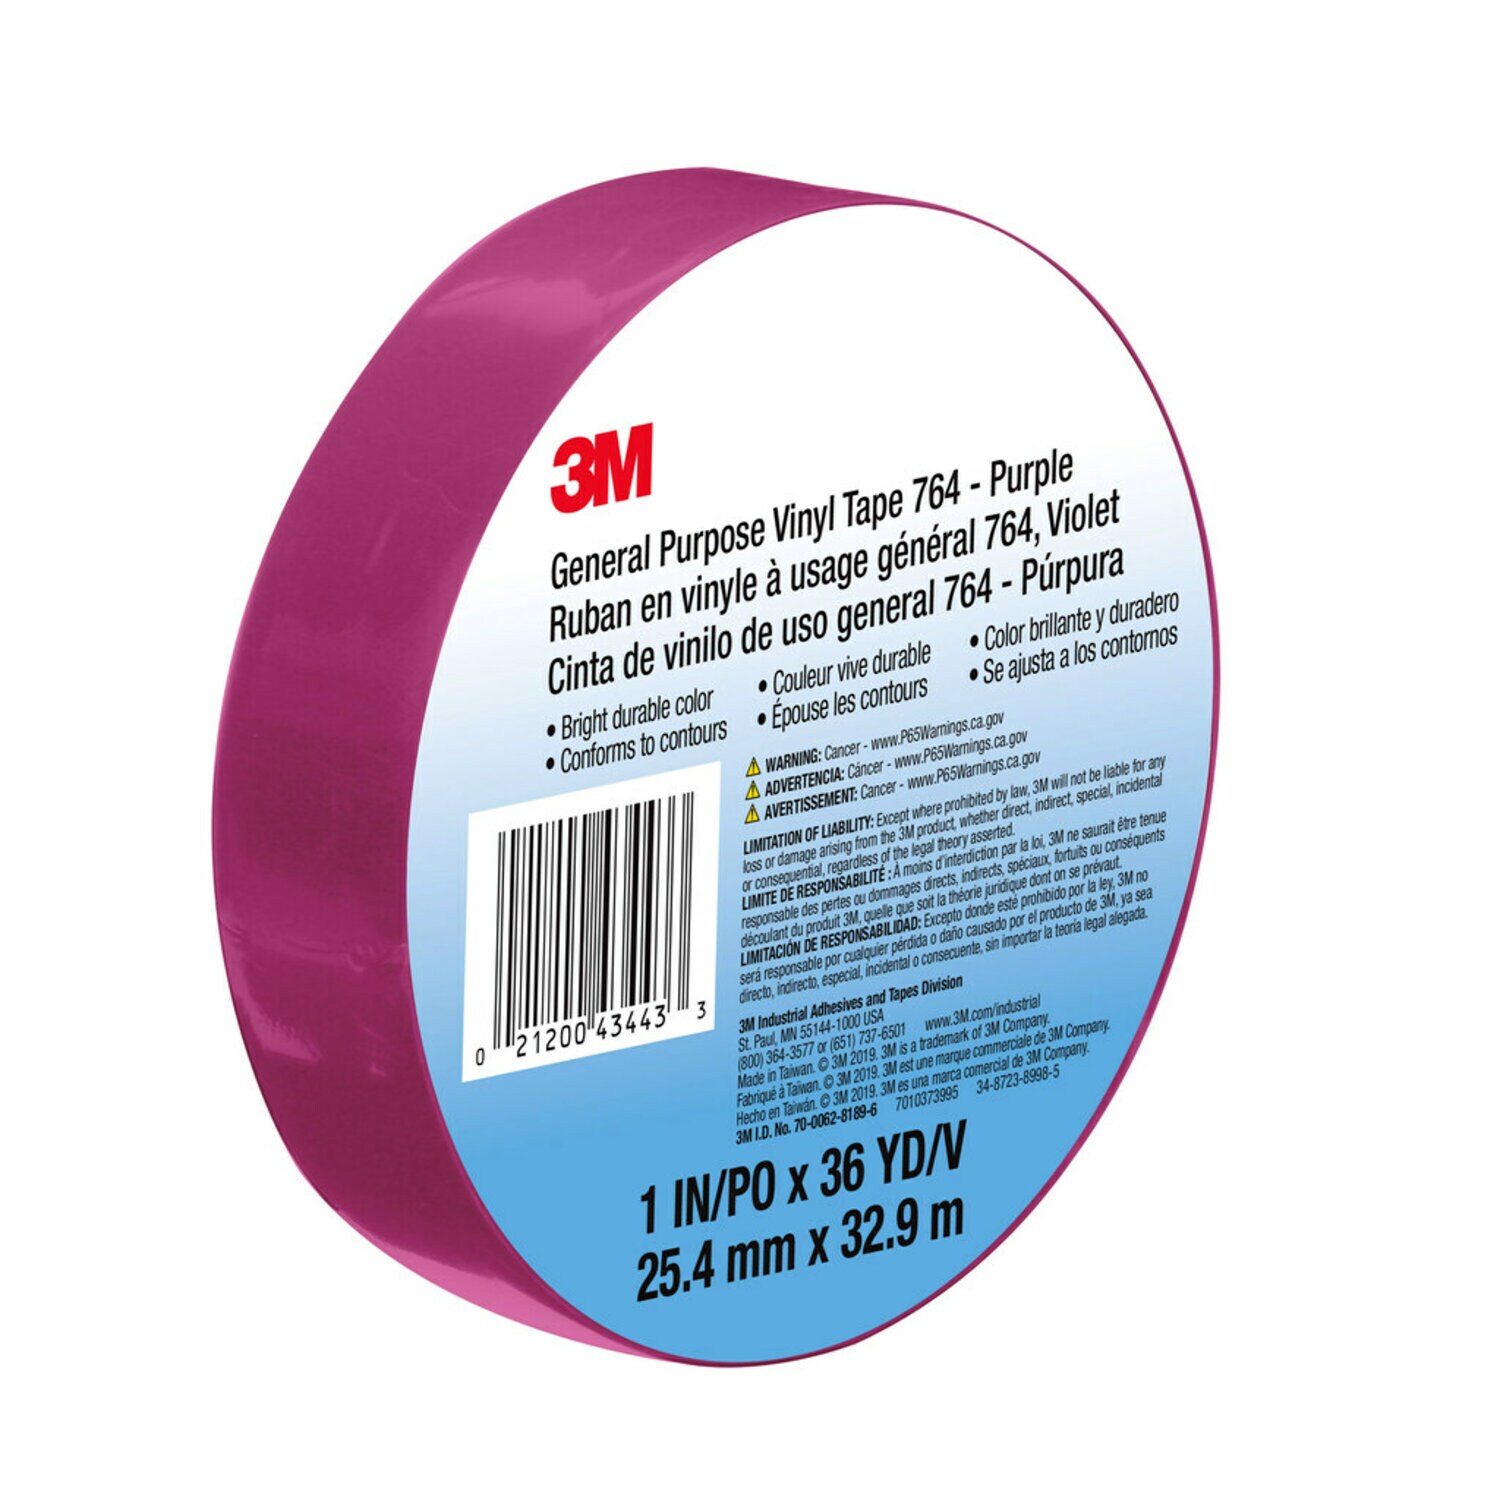 7010373995 - 3M General Purpose Vinyl Tape 764, Purple, 1 in x 36 yd, 5 mil, 36 Roll/Case, Individually Wrapped Conveniently Packaged